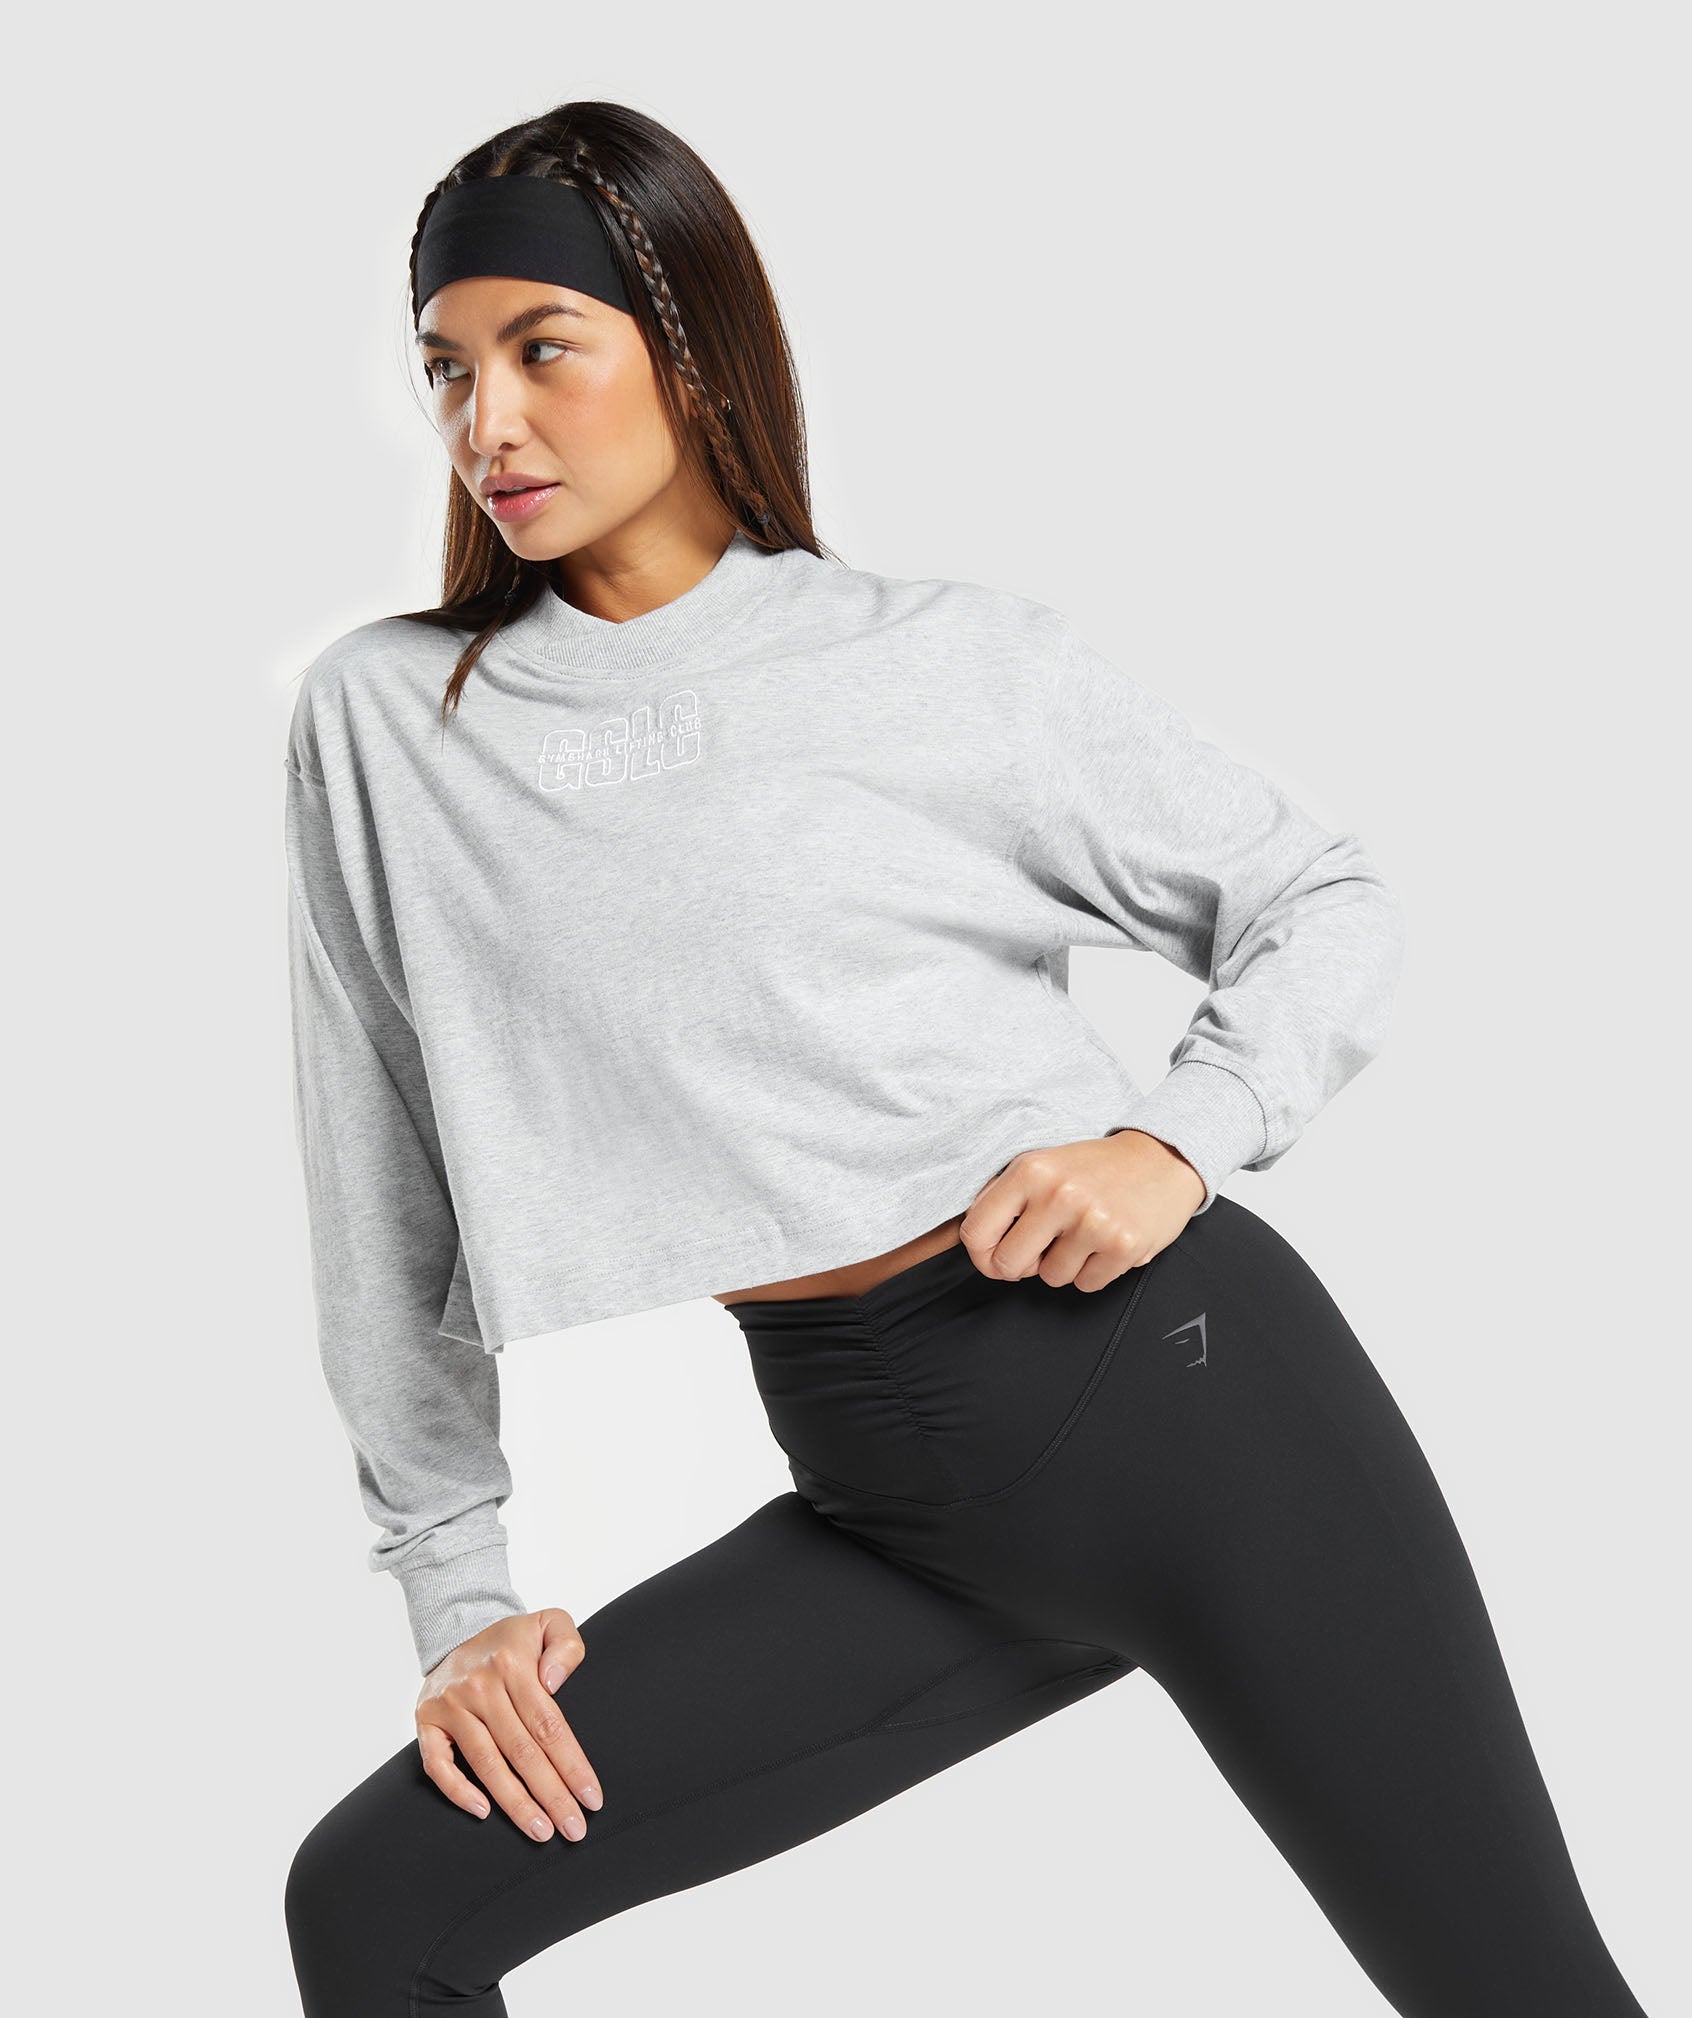 Outline Graphic Oversized Long Sleeve Top in Light Grey Core Marl - view 7